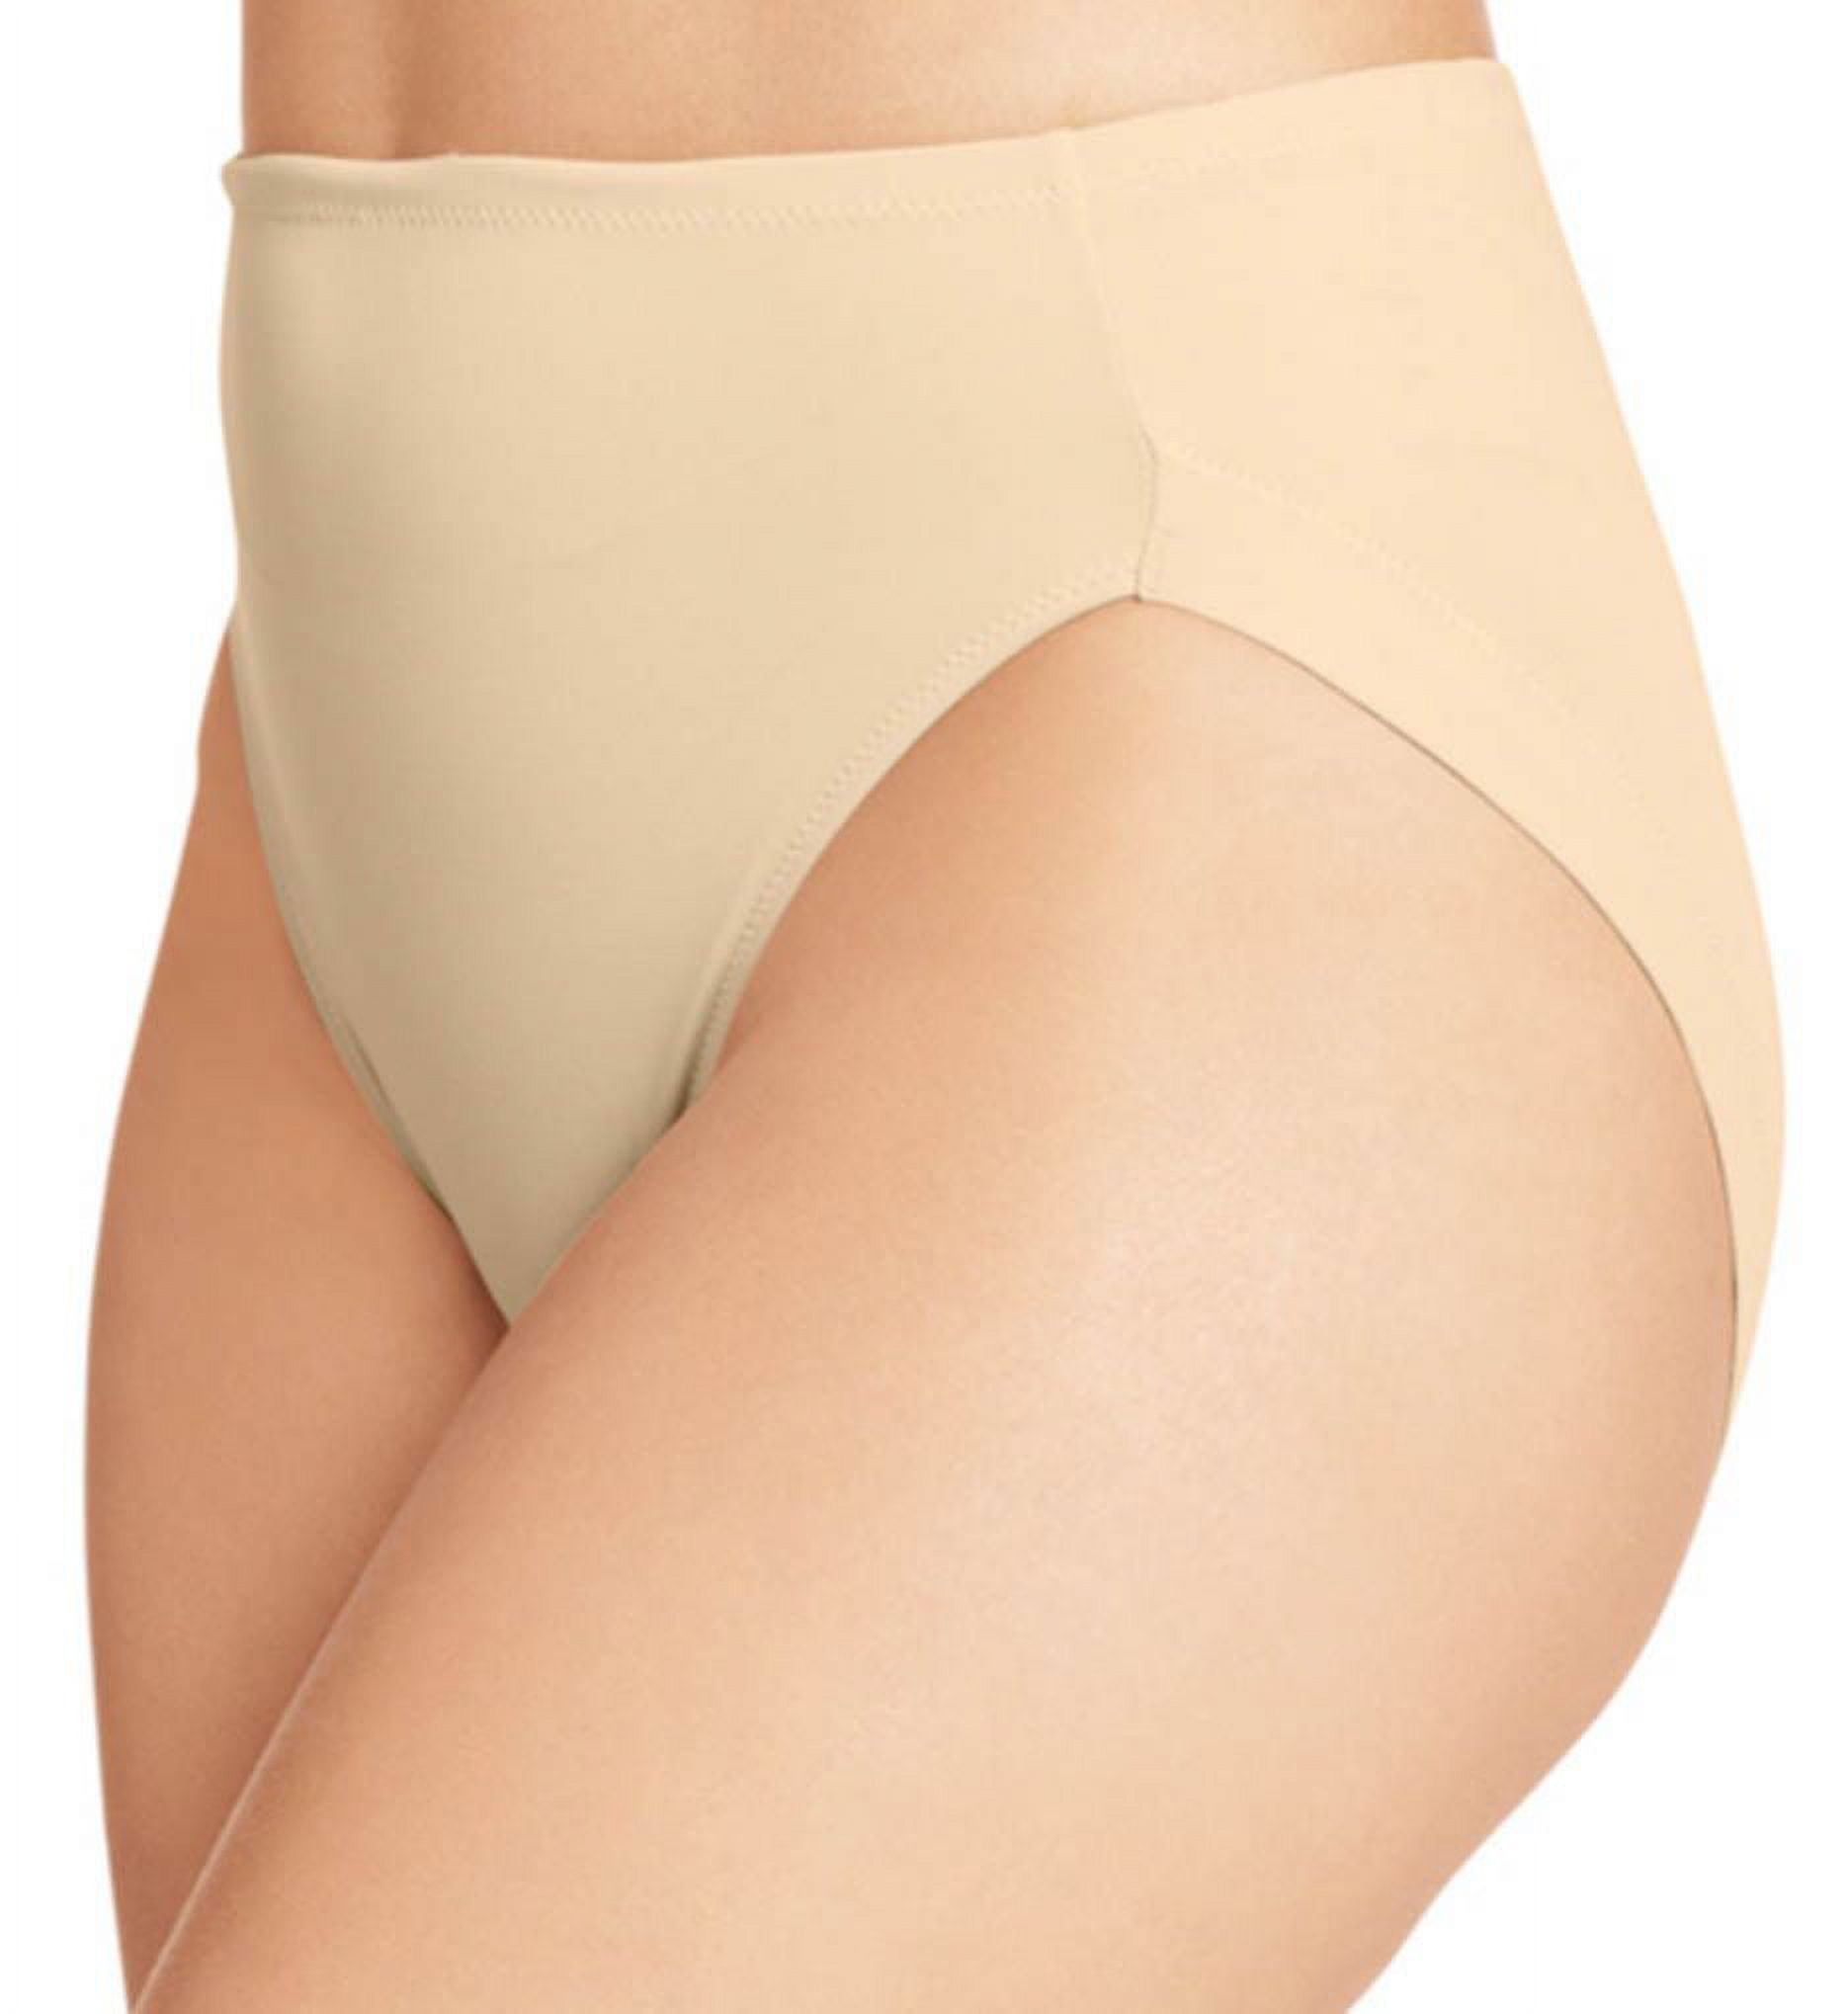 Kindly Yours Women’s Sustainable Cotton Hi-Cut Underwear, 3-Pack, Sizes XS  to XXXL